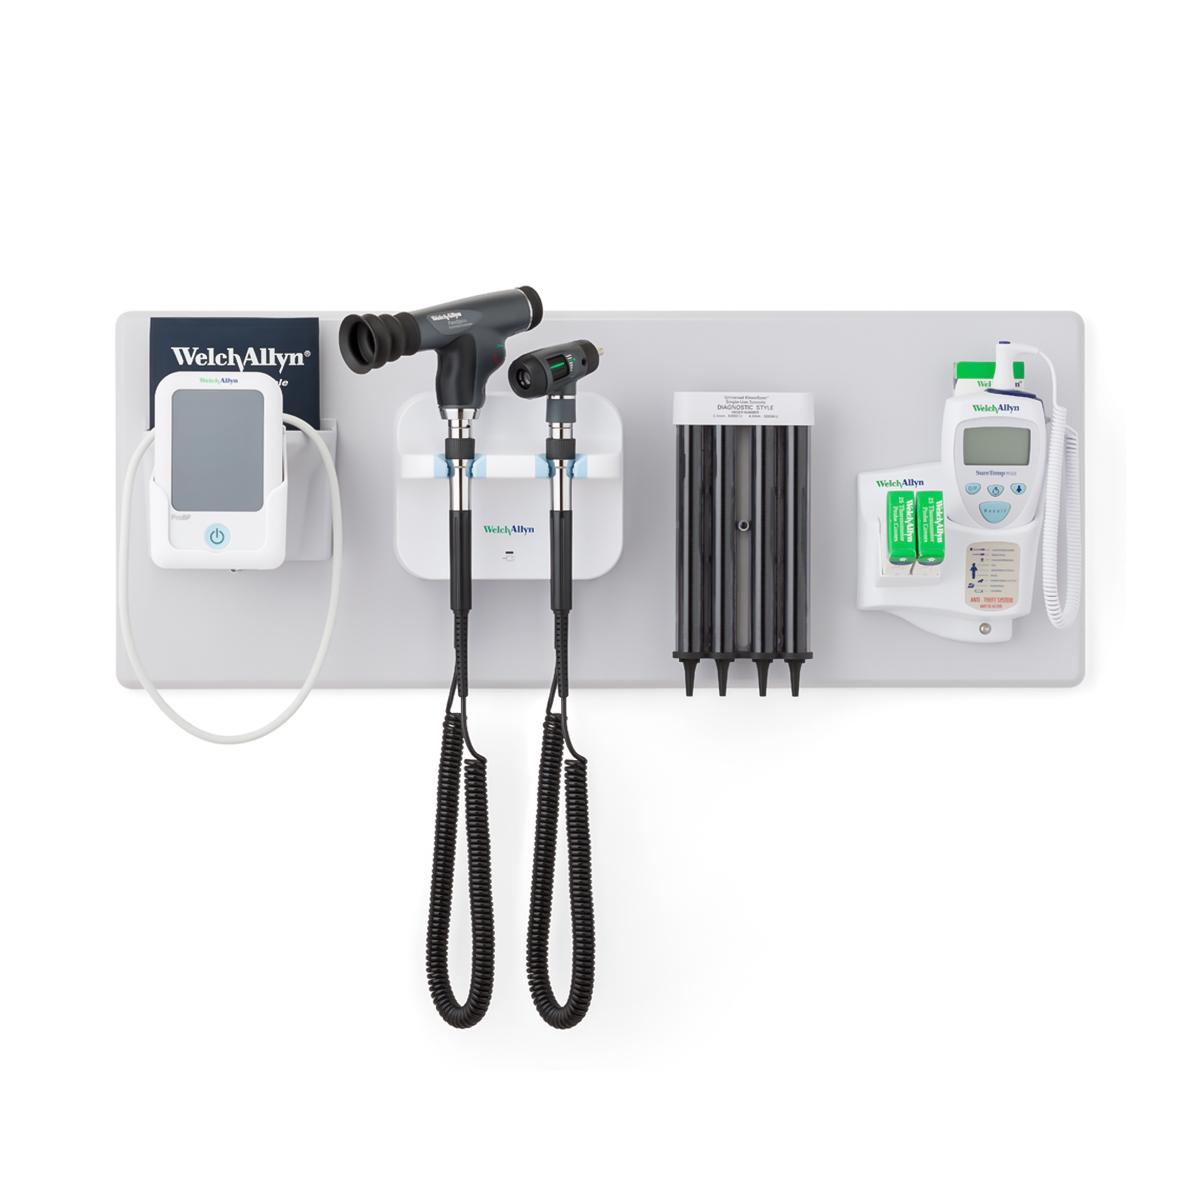 ProBP 2000 Digital Blood Pressure Device mounted on integrated wall systems with other Welch Allyn physical exam products